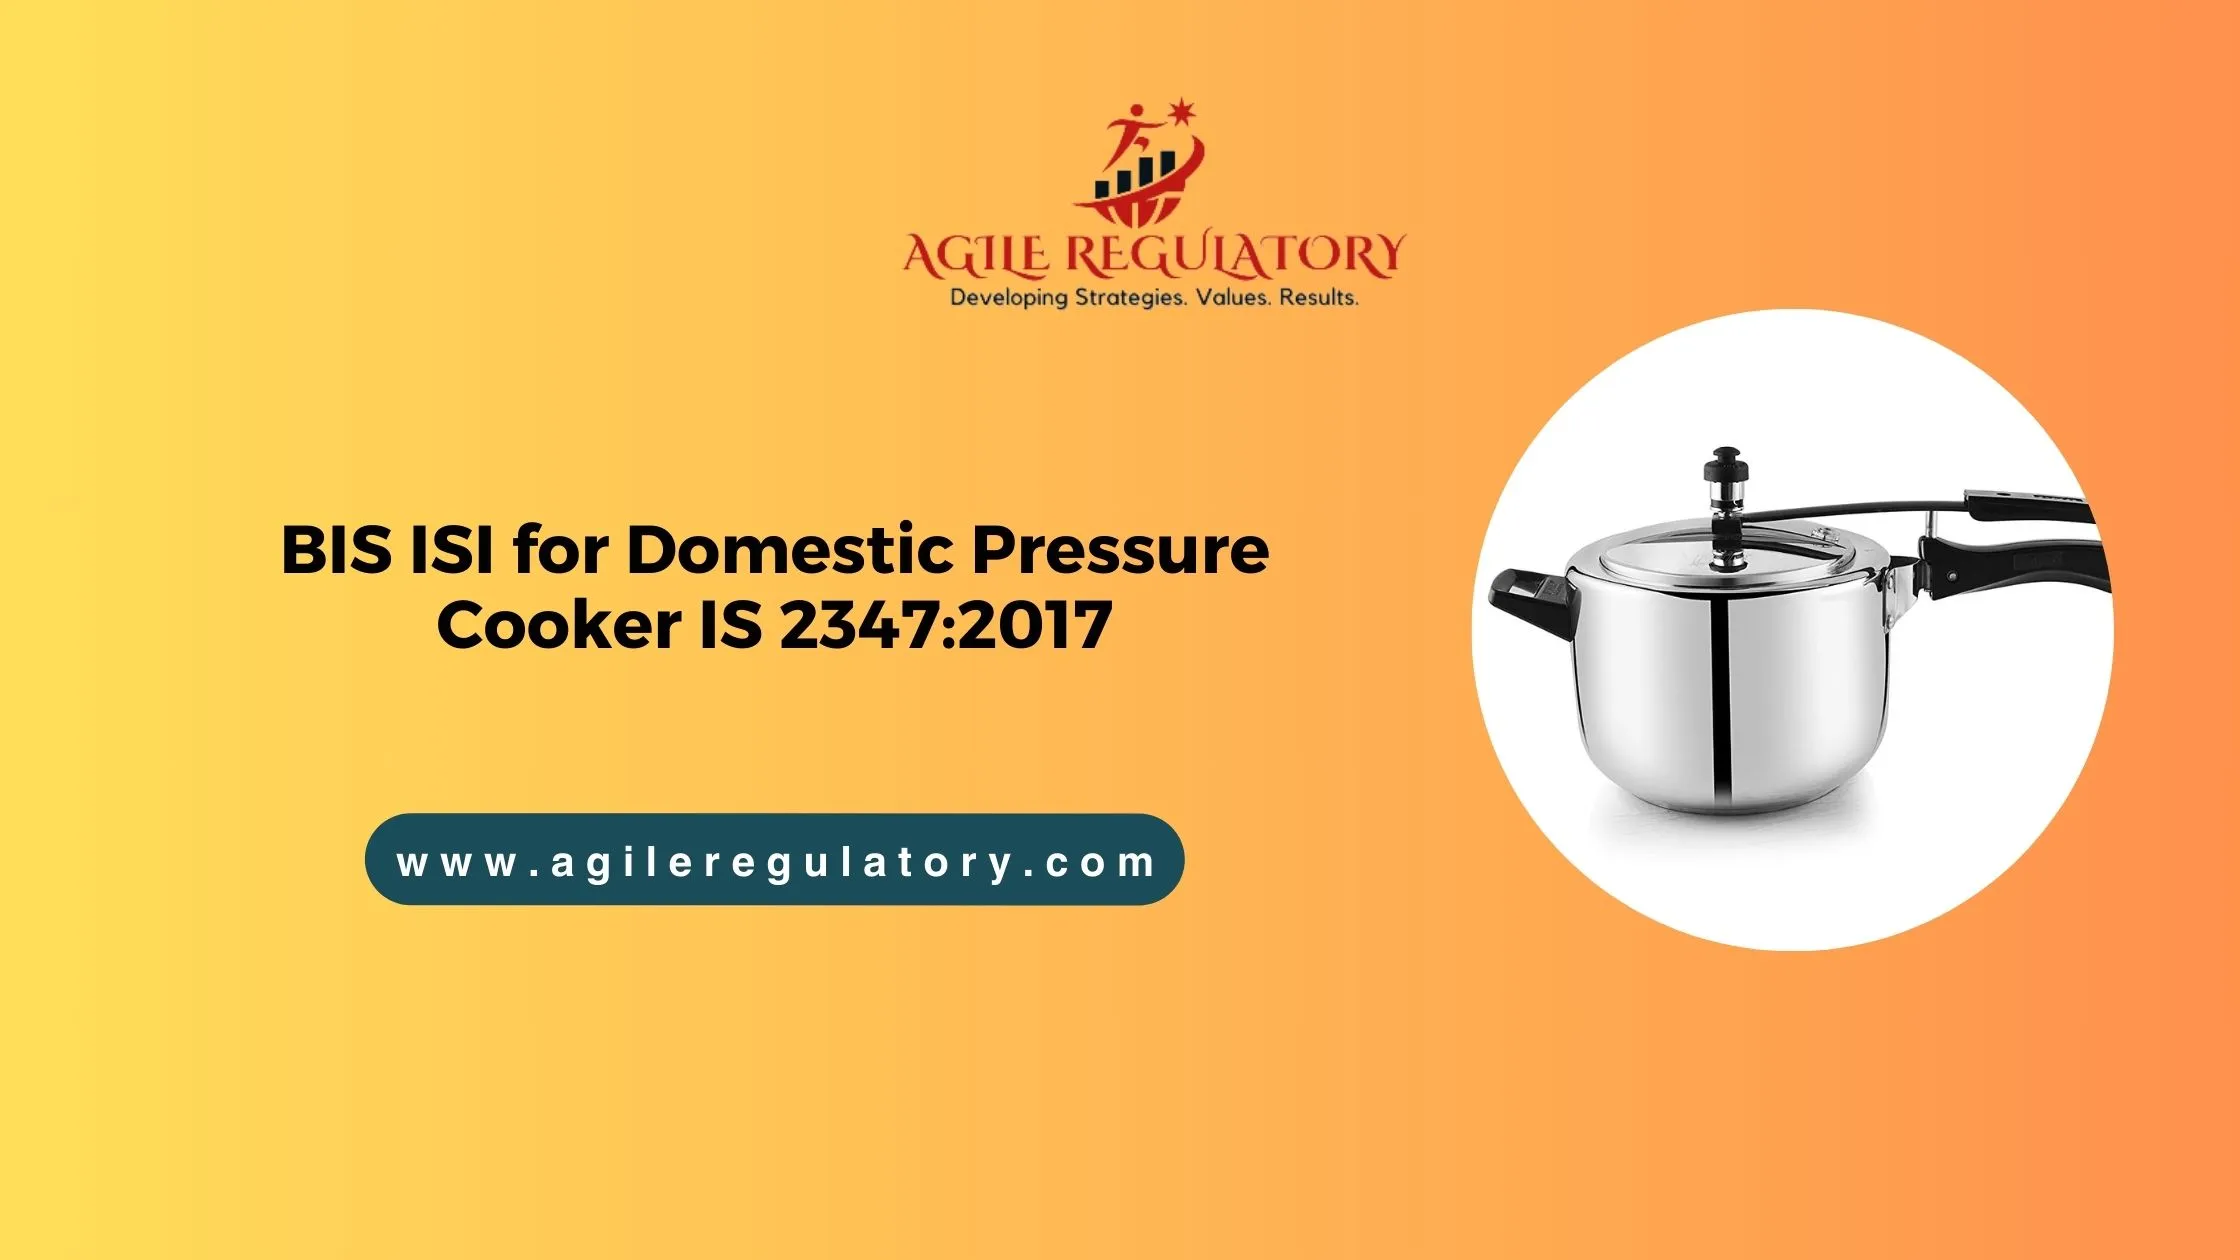 BIS for Domestic Pressure Cooker IS 2347:2017